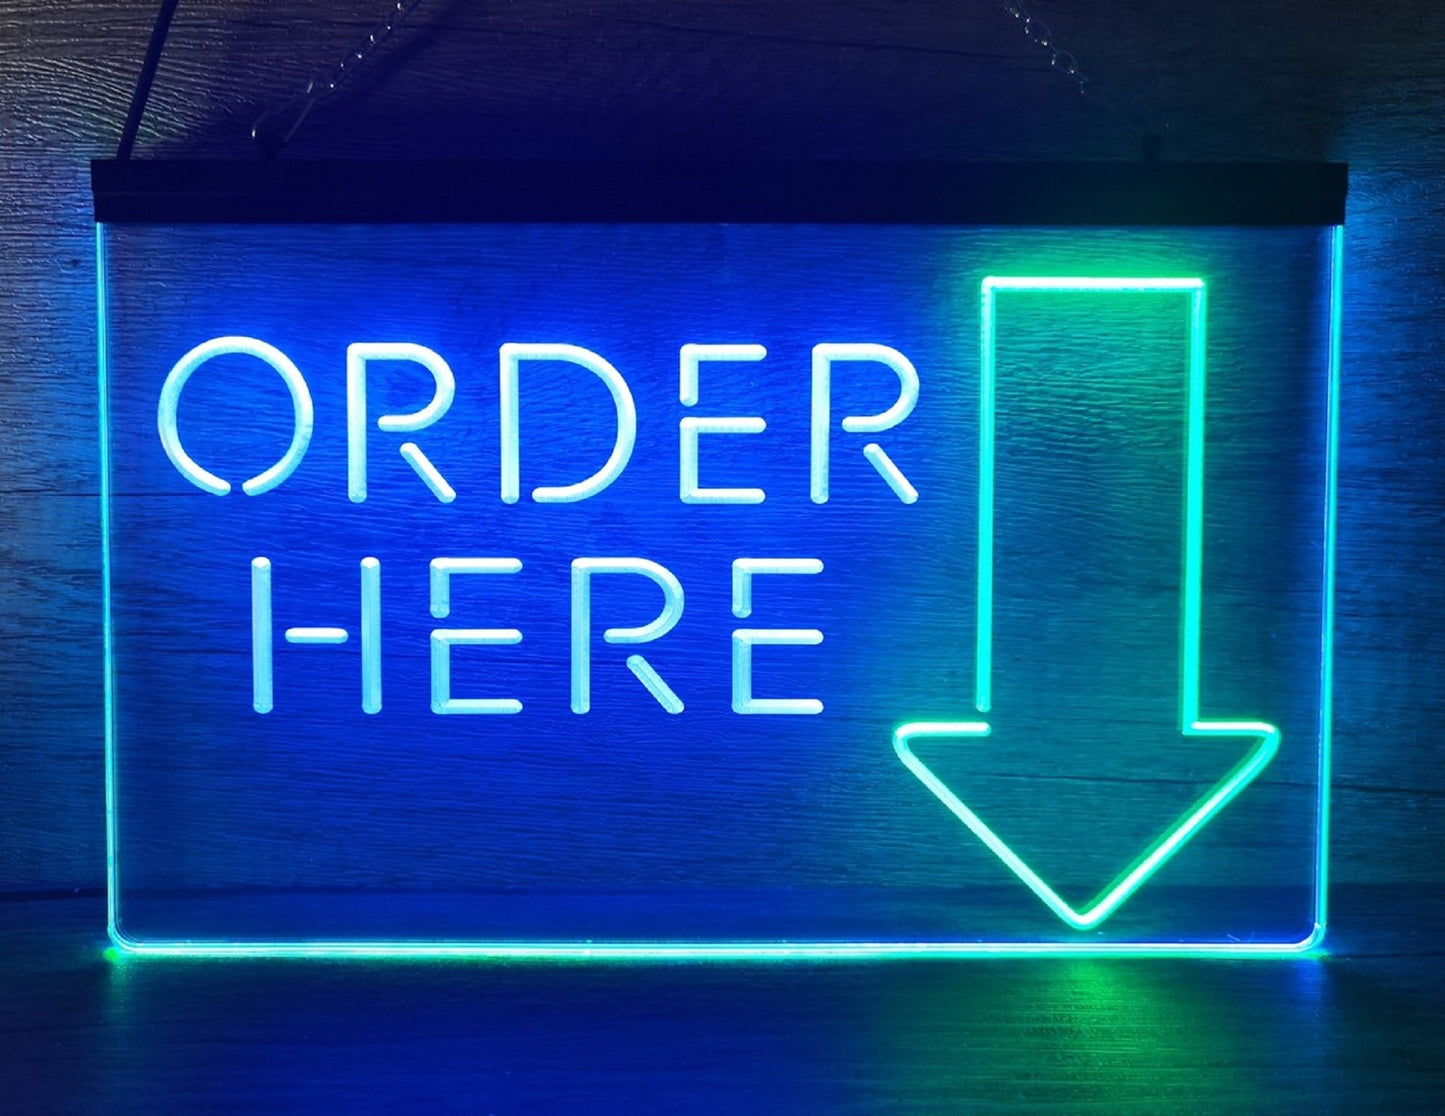 Neon Sign Dual Color Order Here Store Shop Wall Desktop Decor Free Shipping